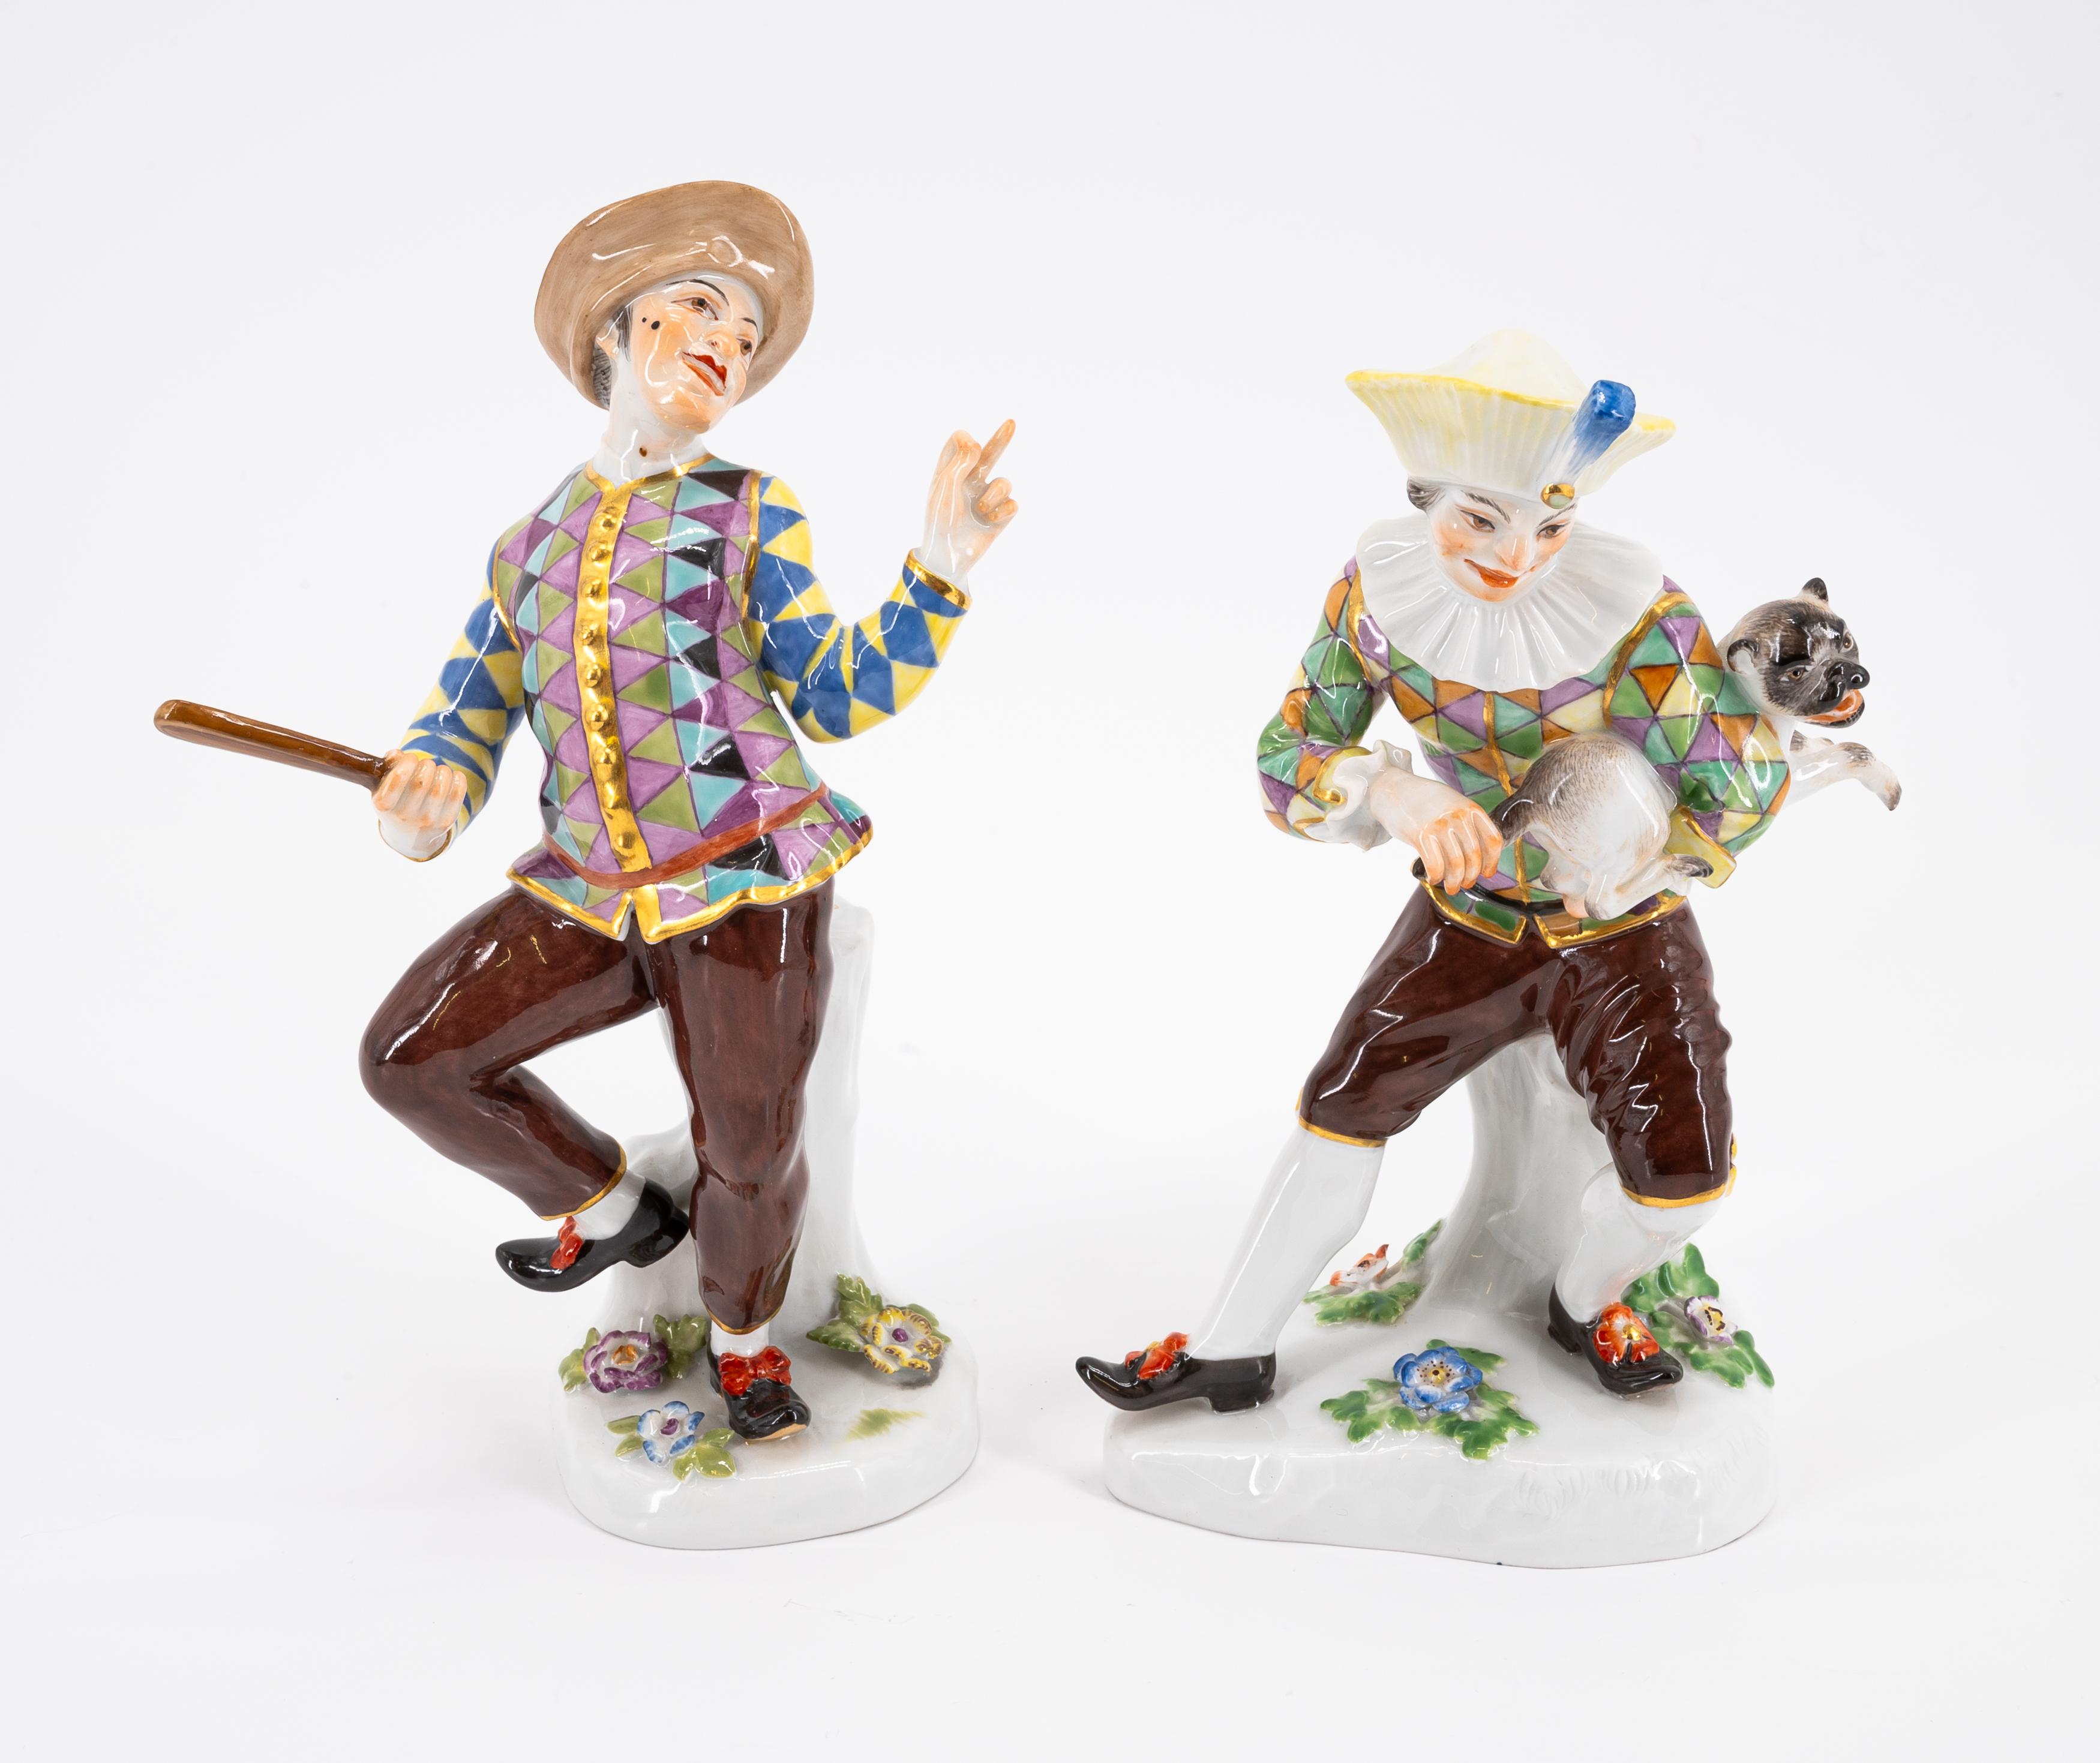 FOUR LARGE AND THREE SMALL PORCELAIN FIGURINES FROM THE COMMEDIA DELL'ARTE - Image 8 of 10